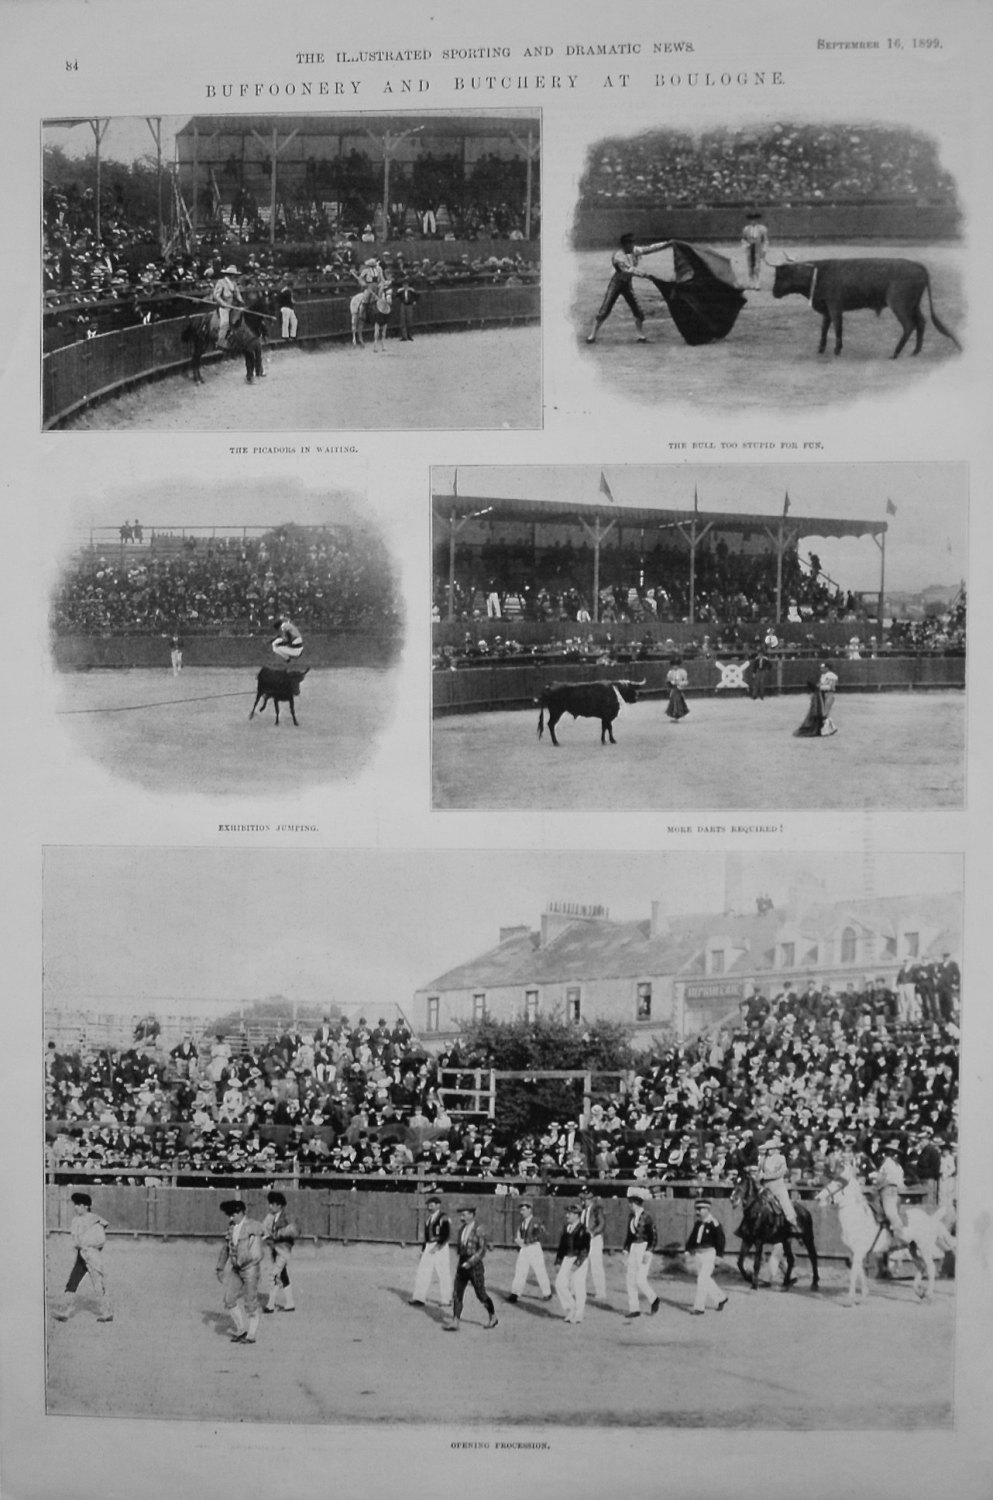 Buffoonery and Butchery at Boulogne. 1899 (Bull Fighting).